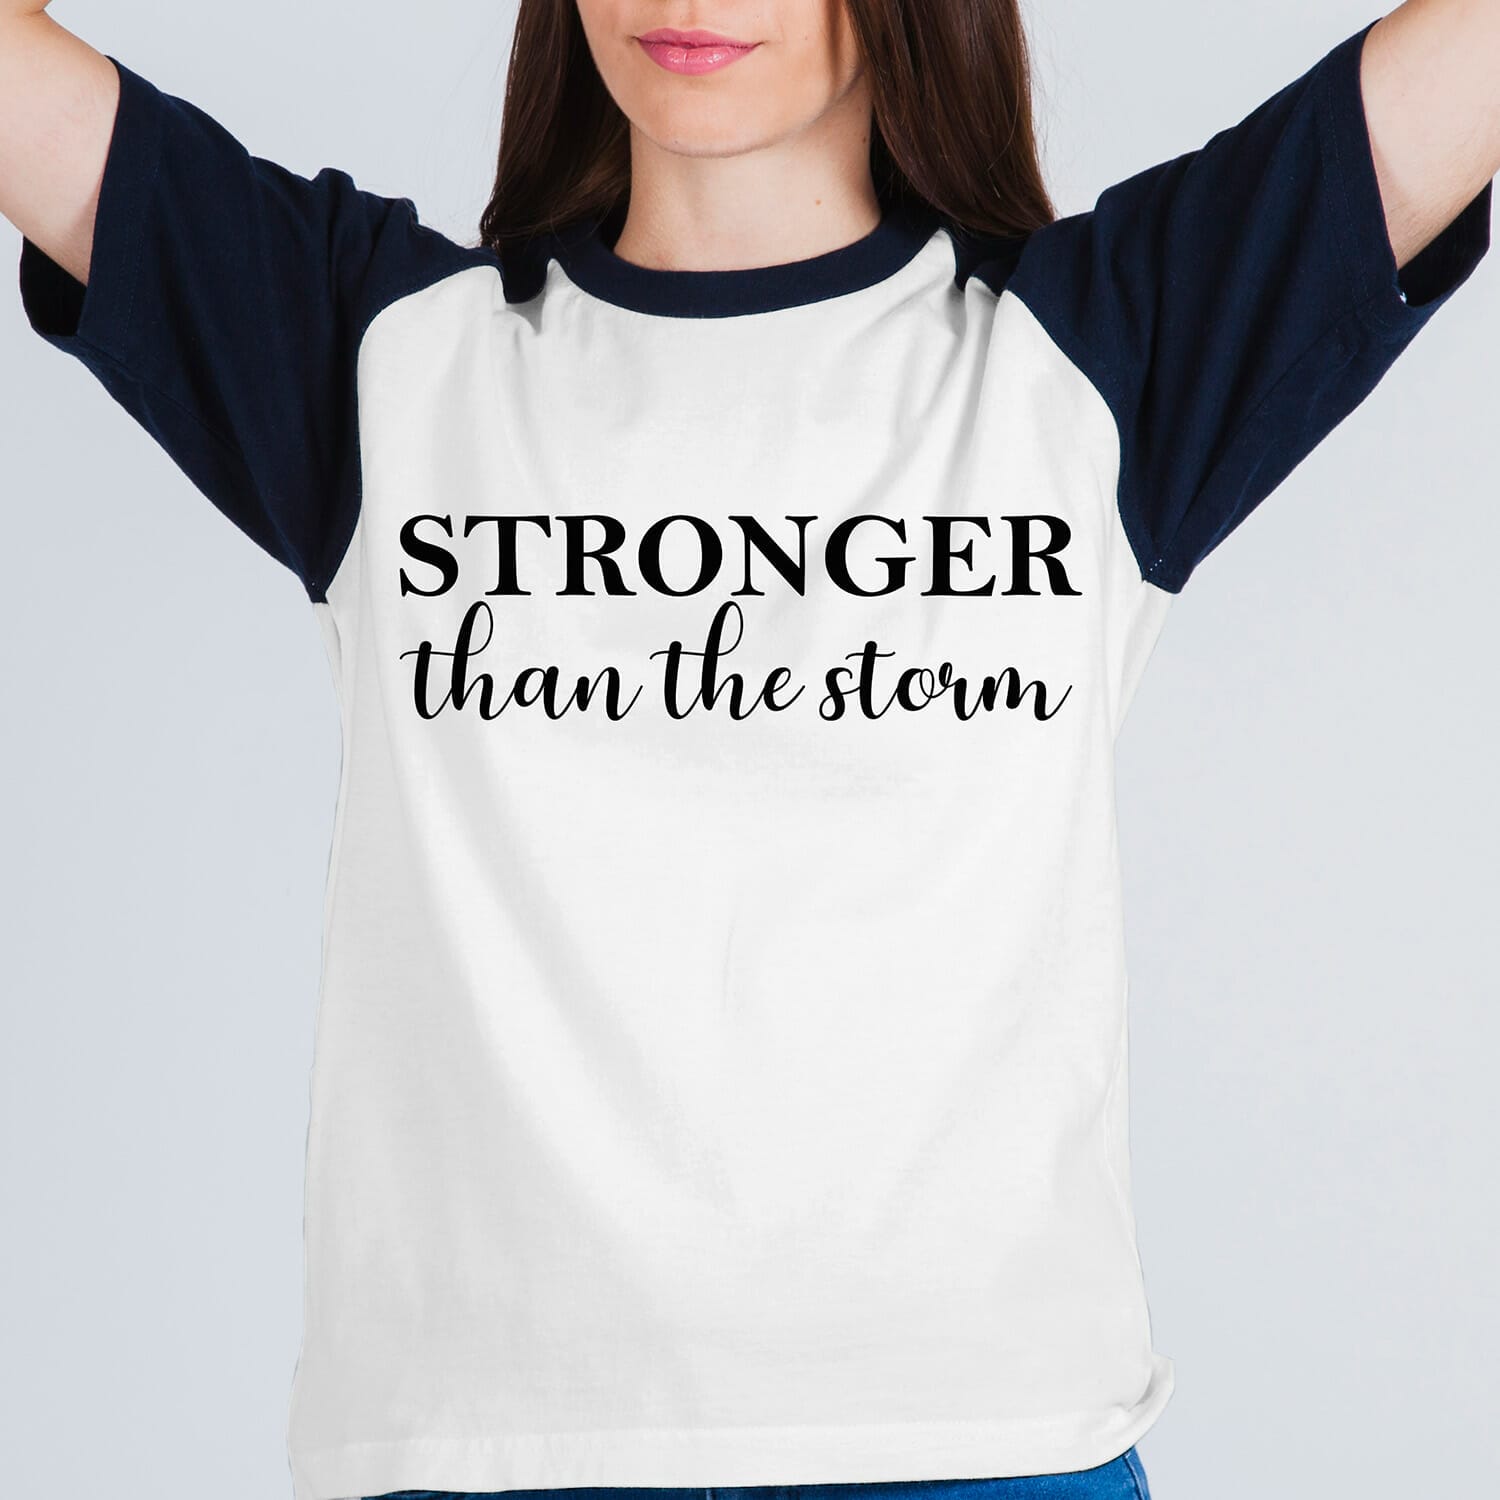 Stronger than the storm Tshirt design For Free